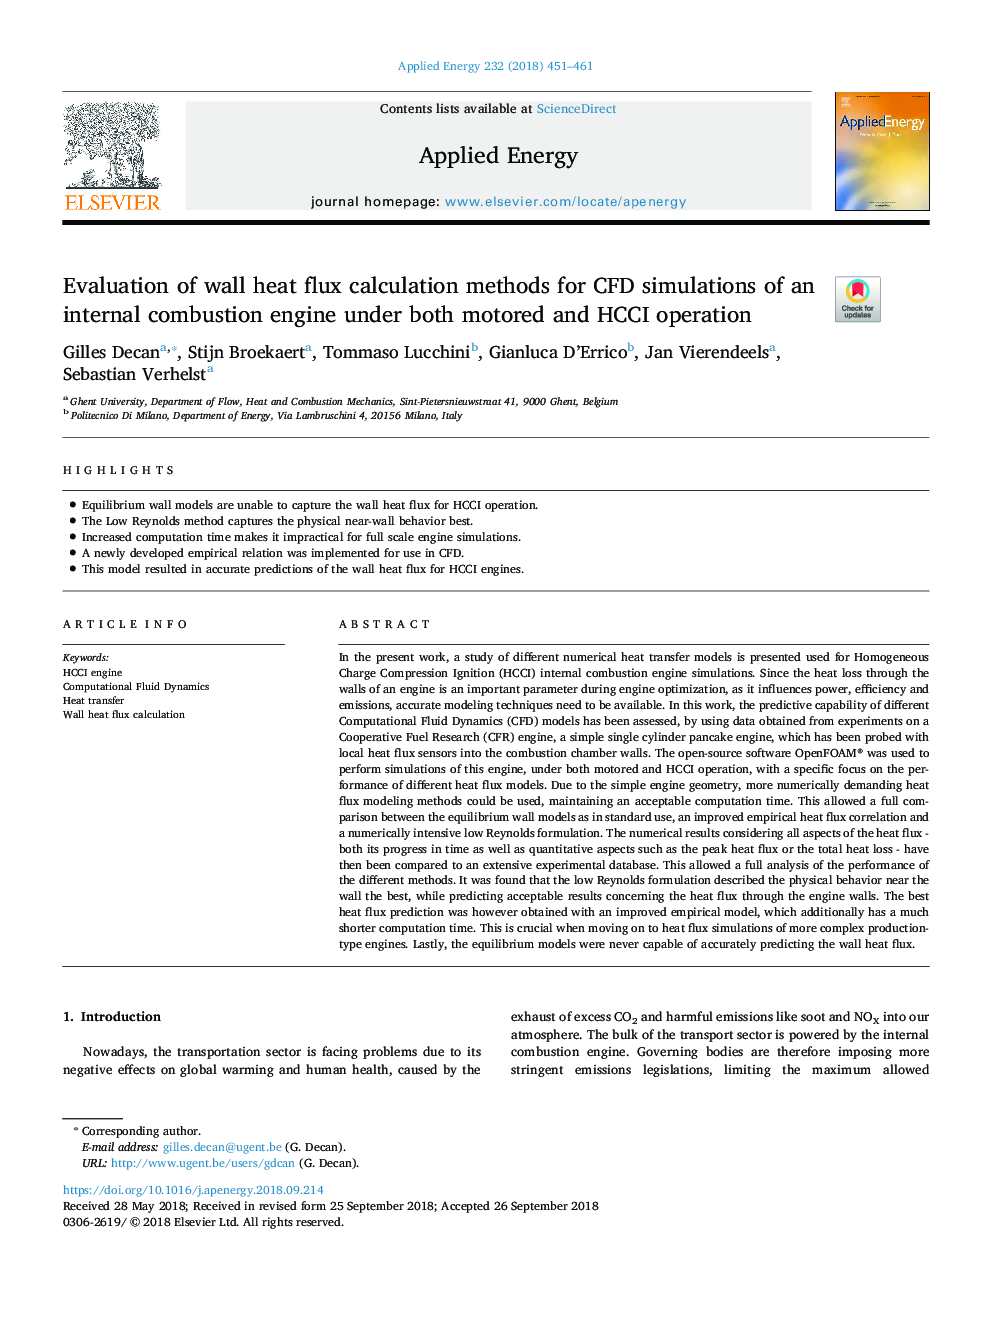 Evaluation of wall heat flux calculation methods for CFD simulations of an internal combustion engine under both motored and HCCI operation